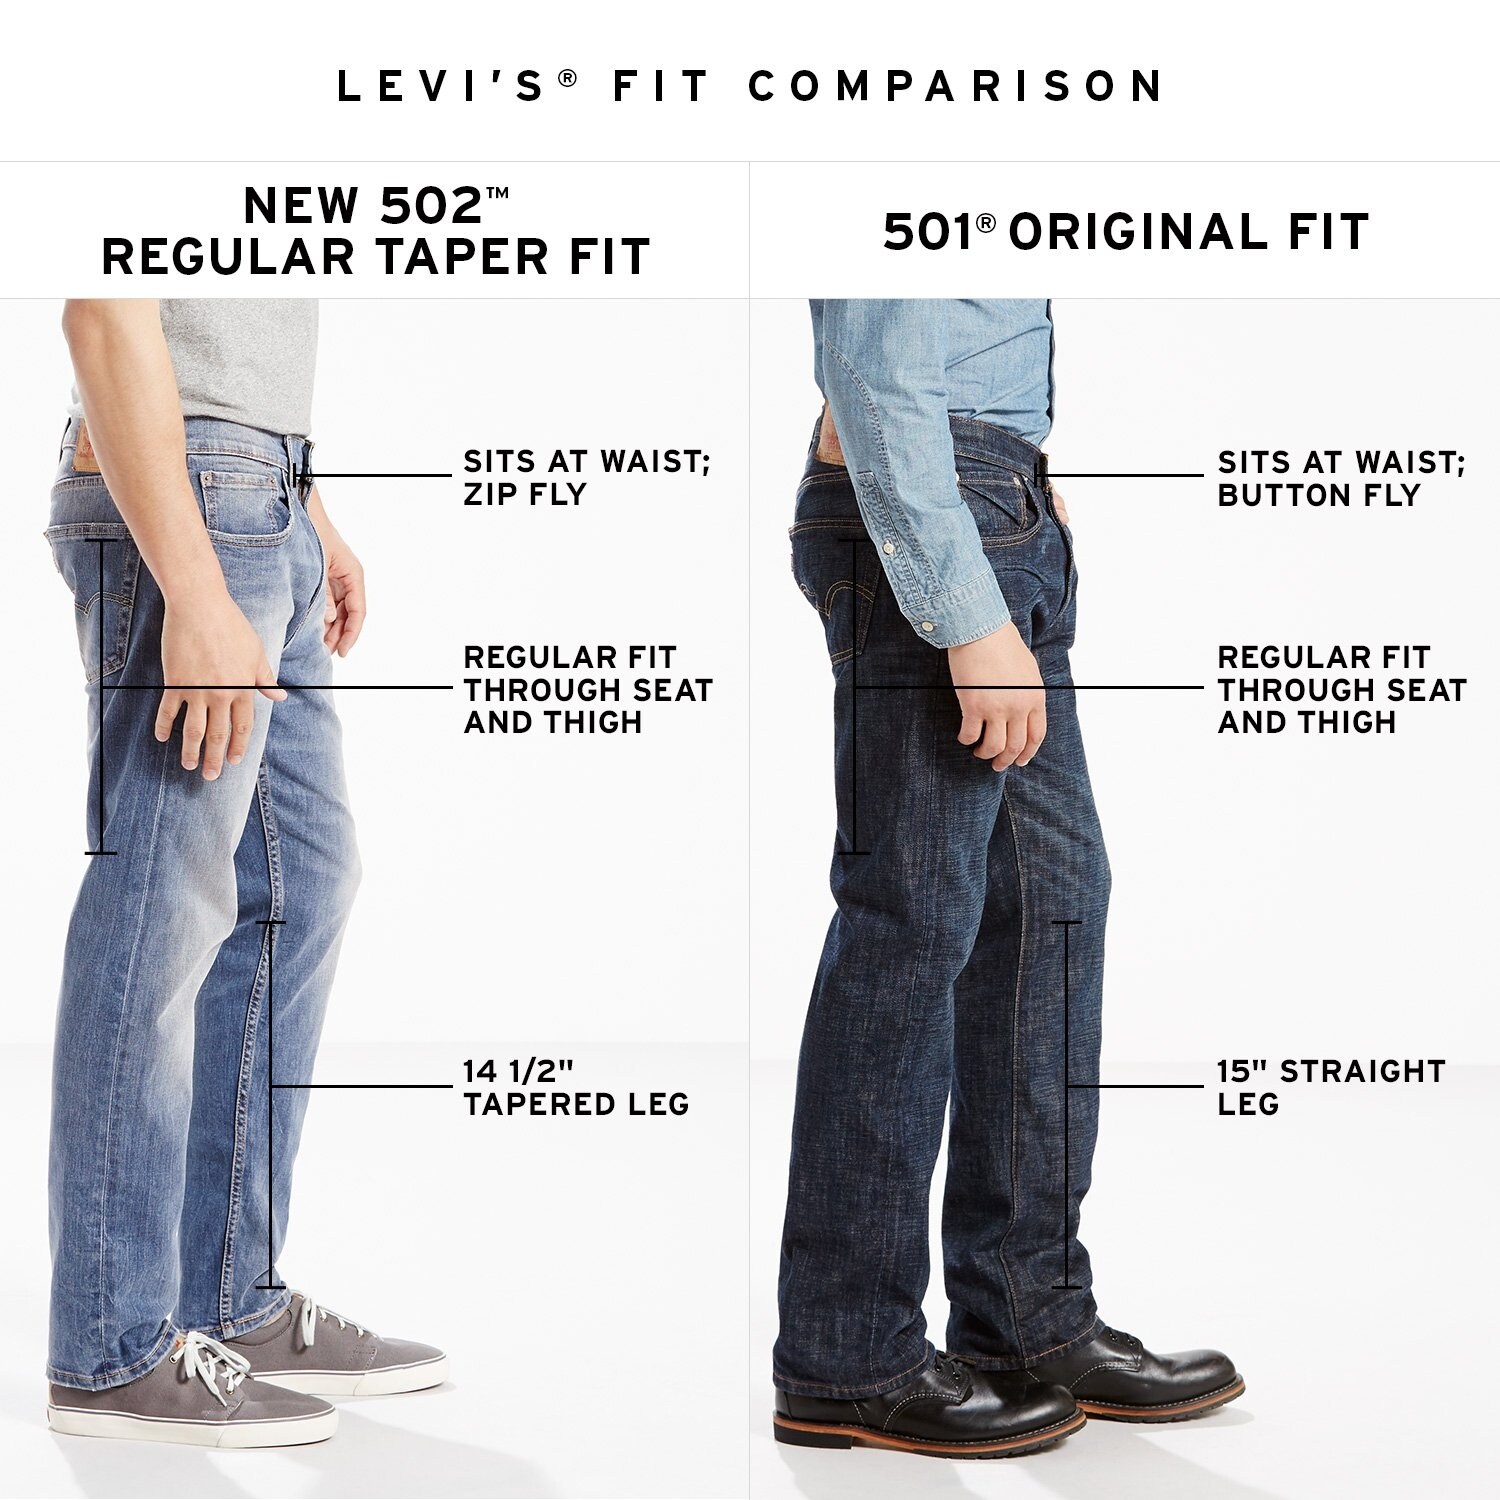 levis 501 502 difference